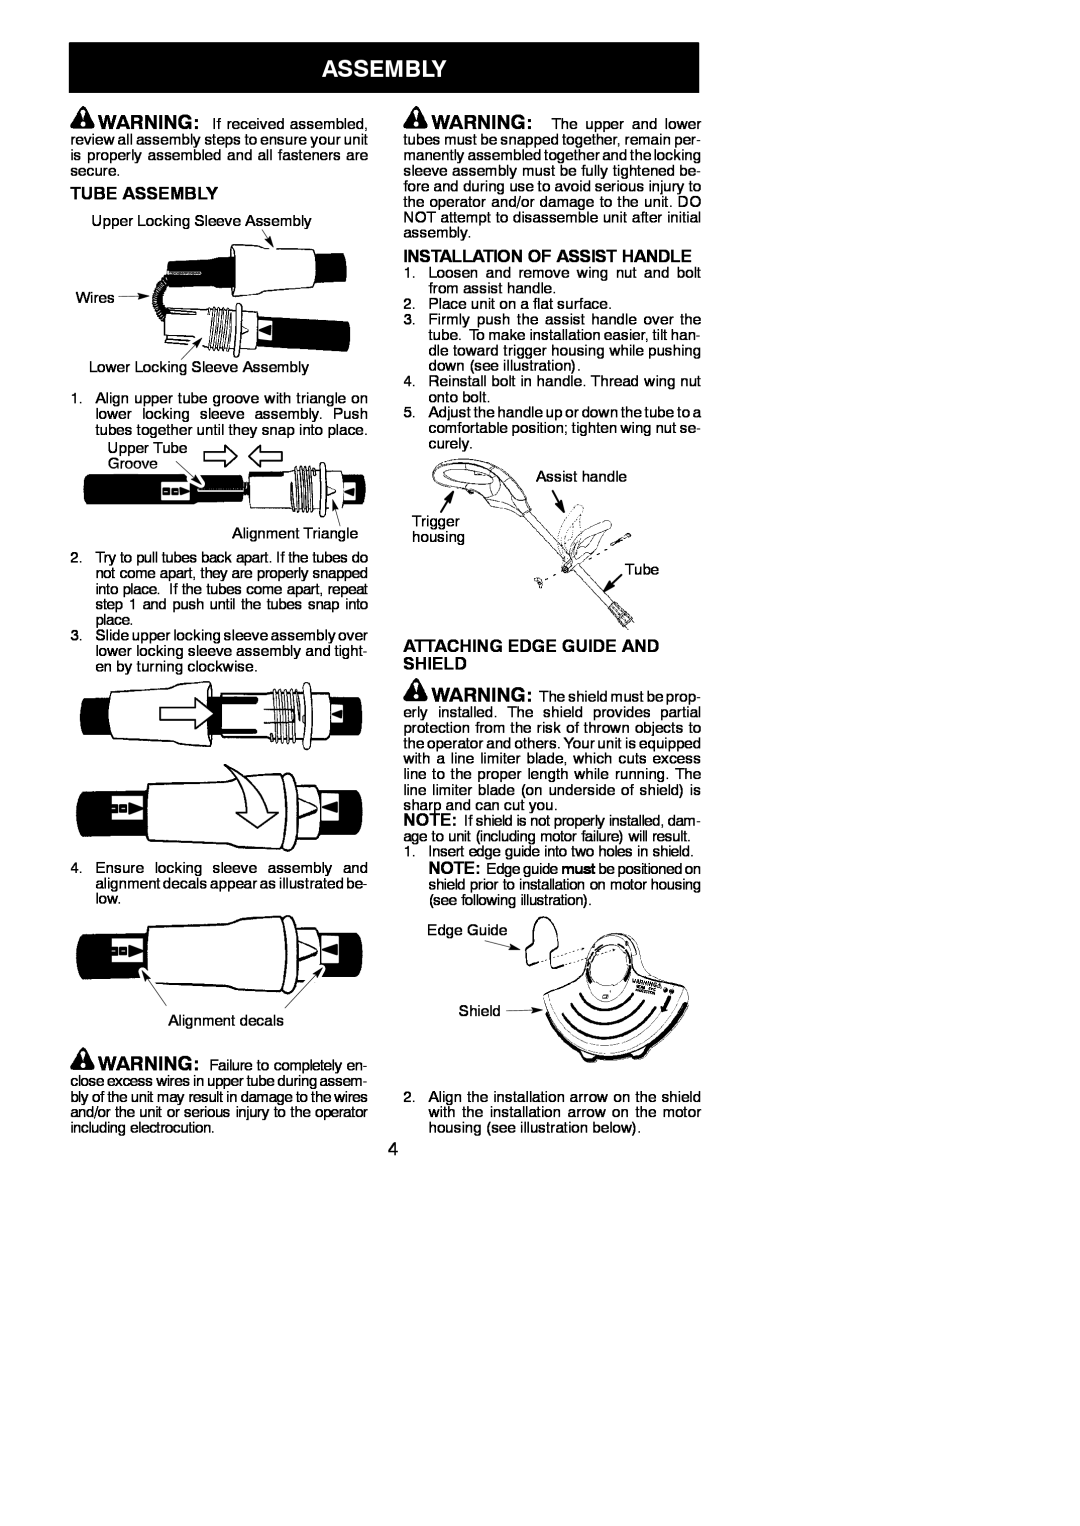 Weed Eater 545186762 instruction manual Tube Assembly, Installation Of Assist Handle, Attaching Edge Guide And Shield 